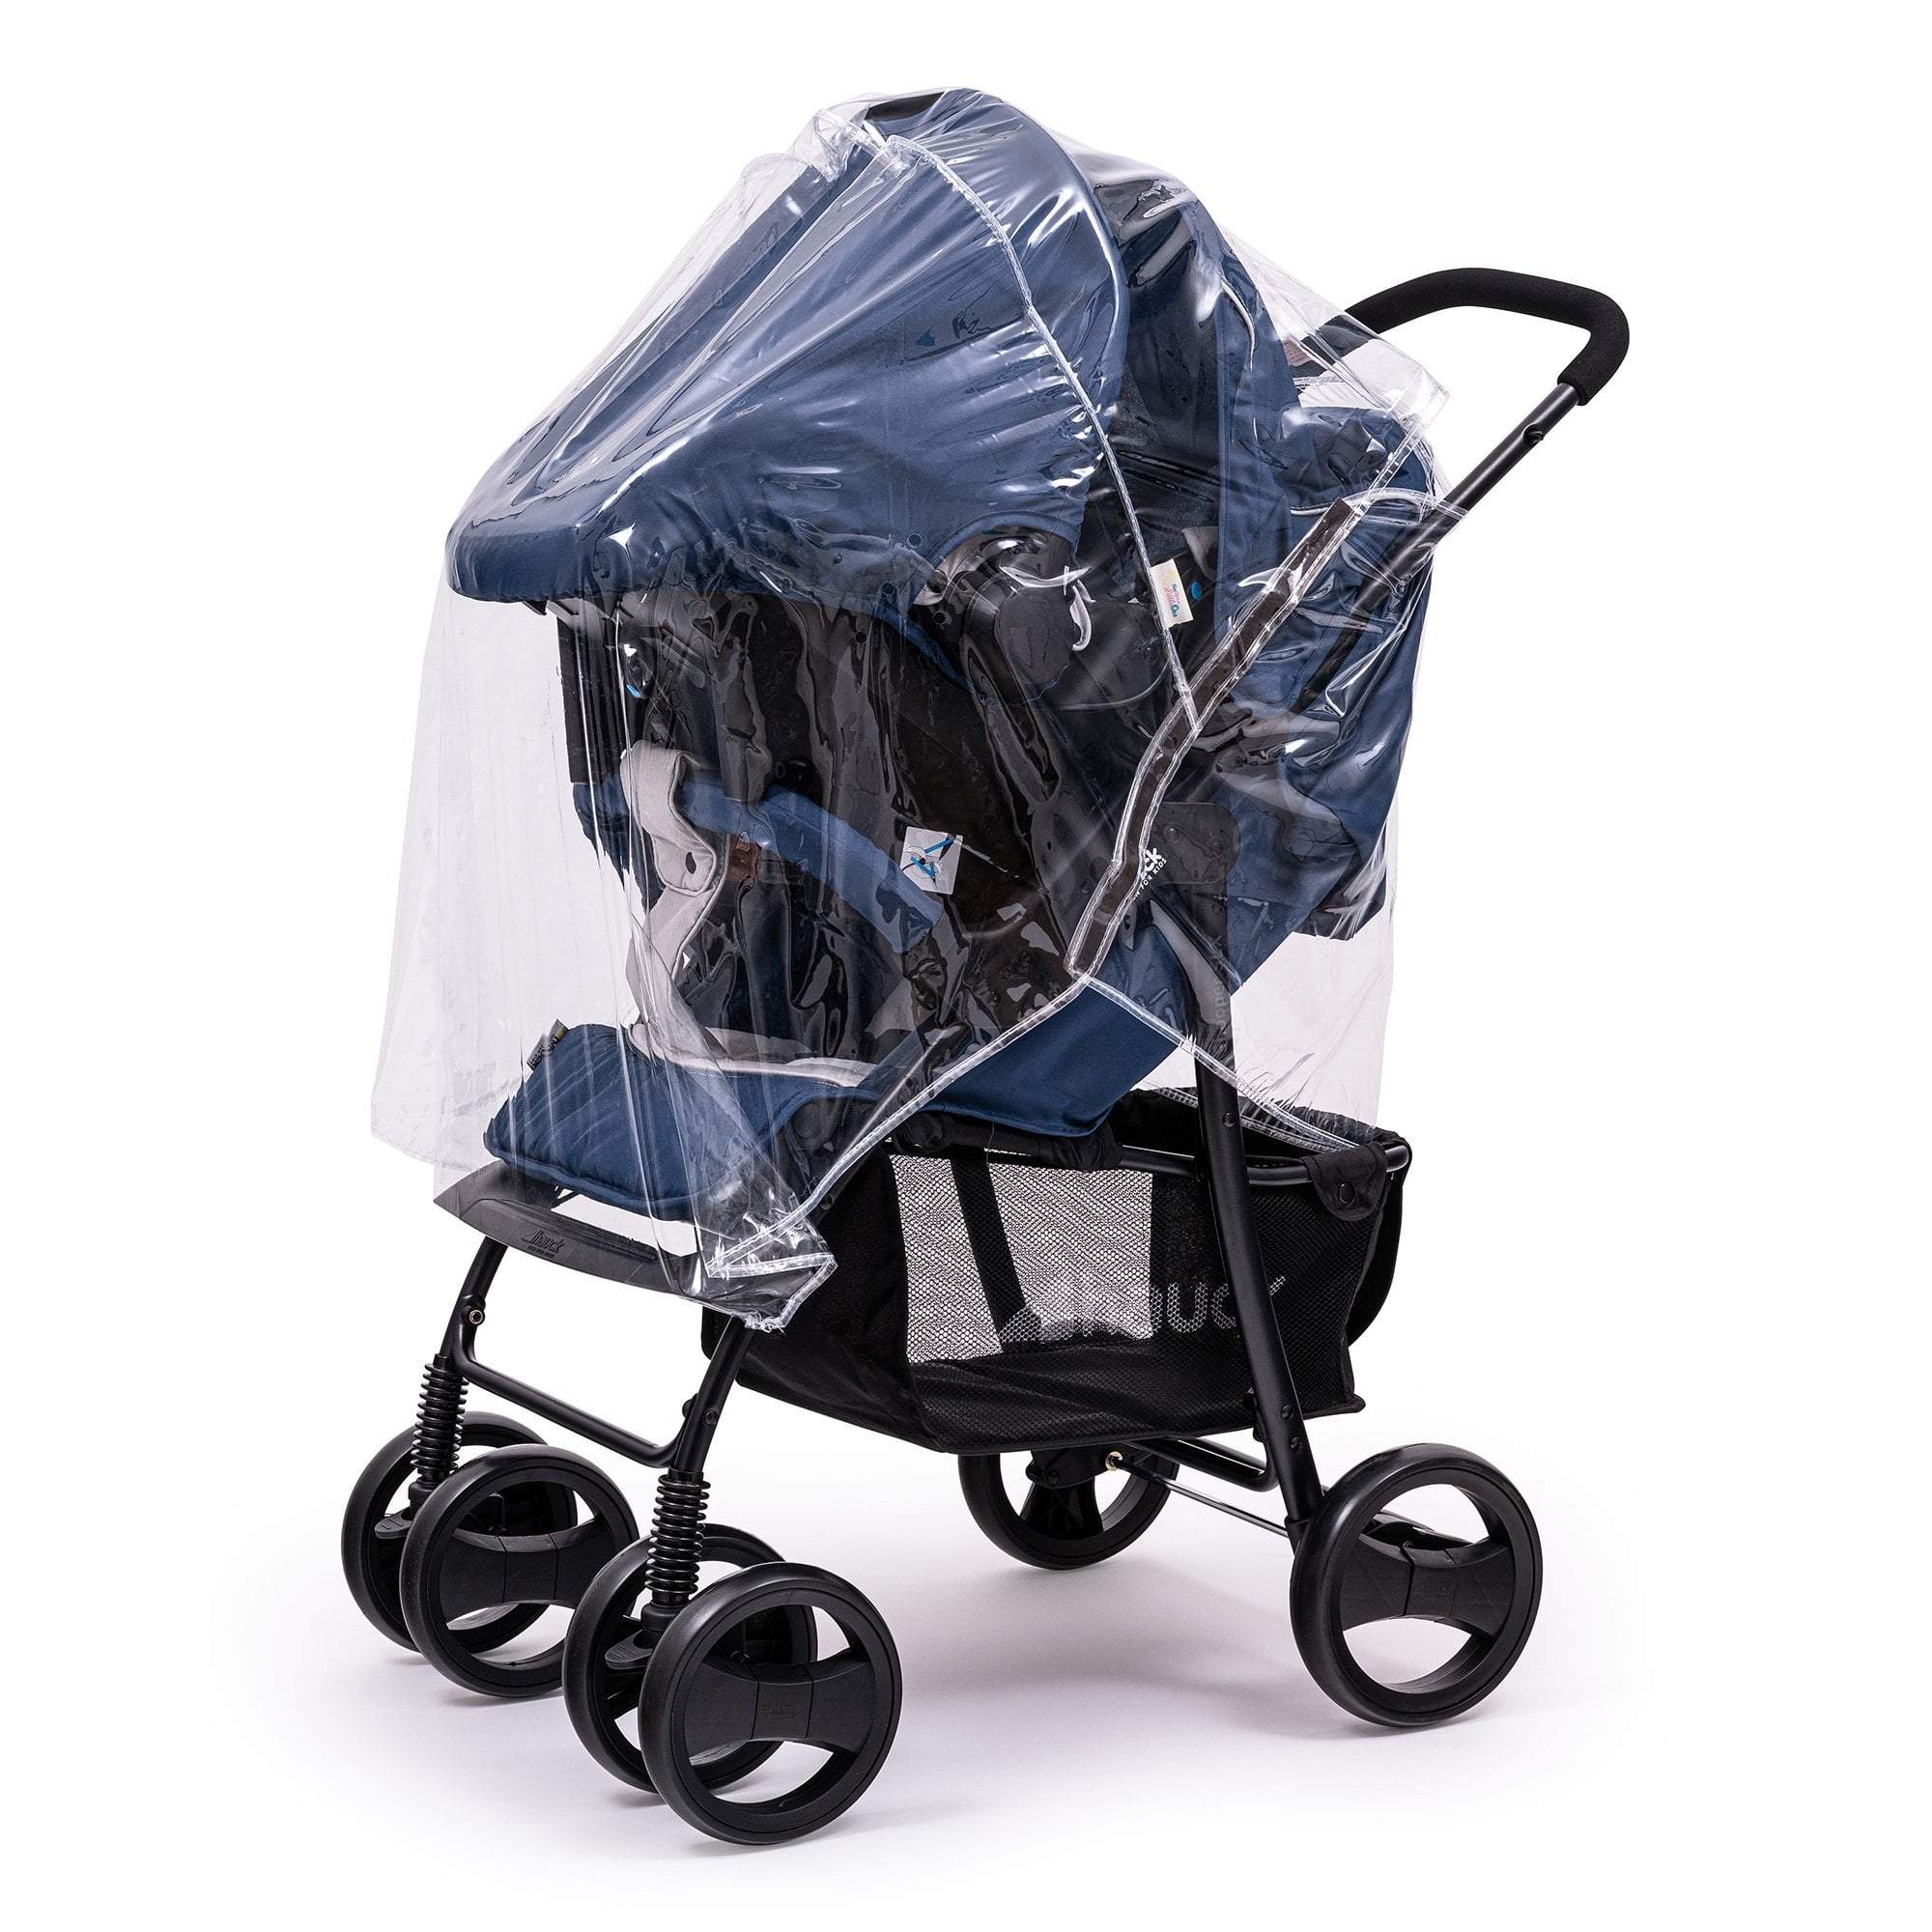 Travel System Raincover Compatible with Tippitoes - Fits All Models - For Your Little One